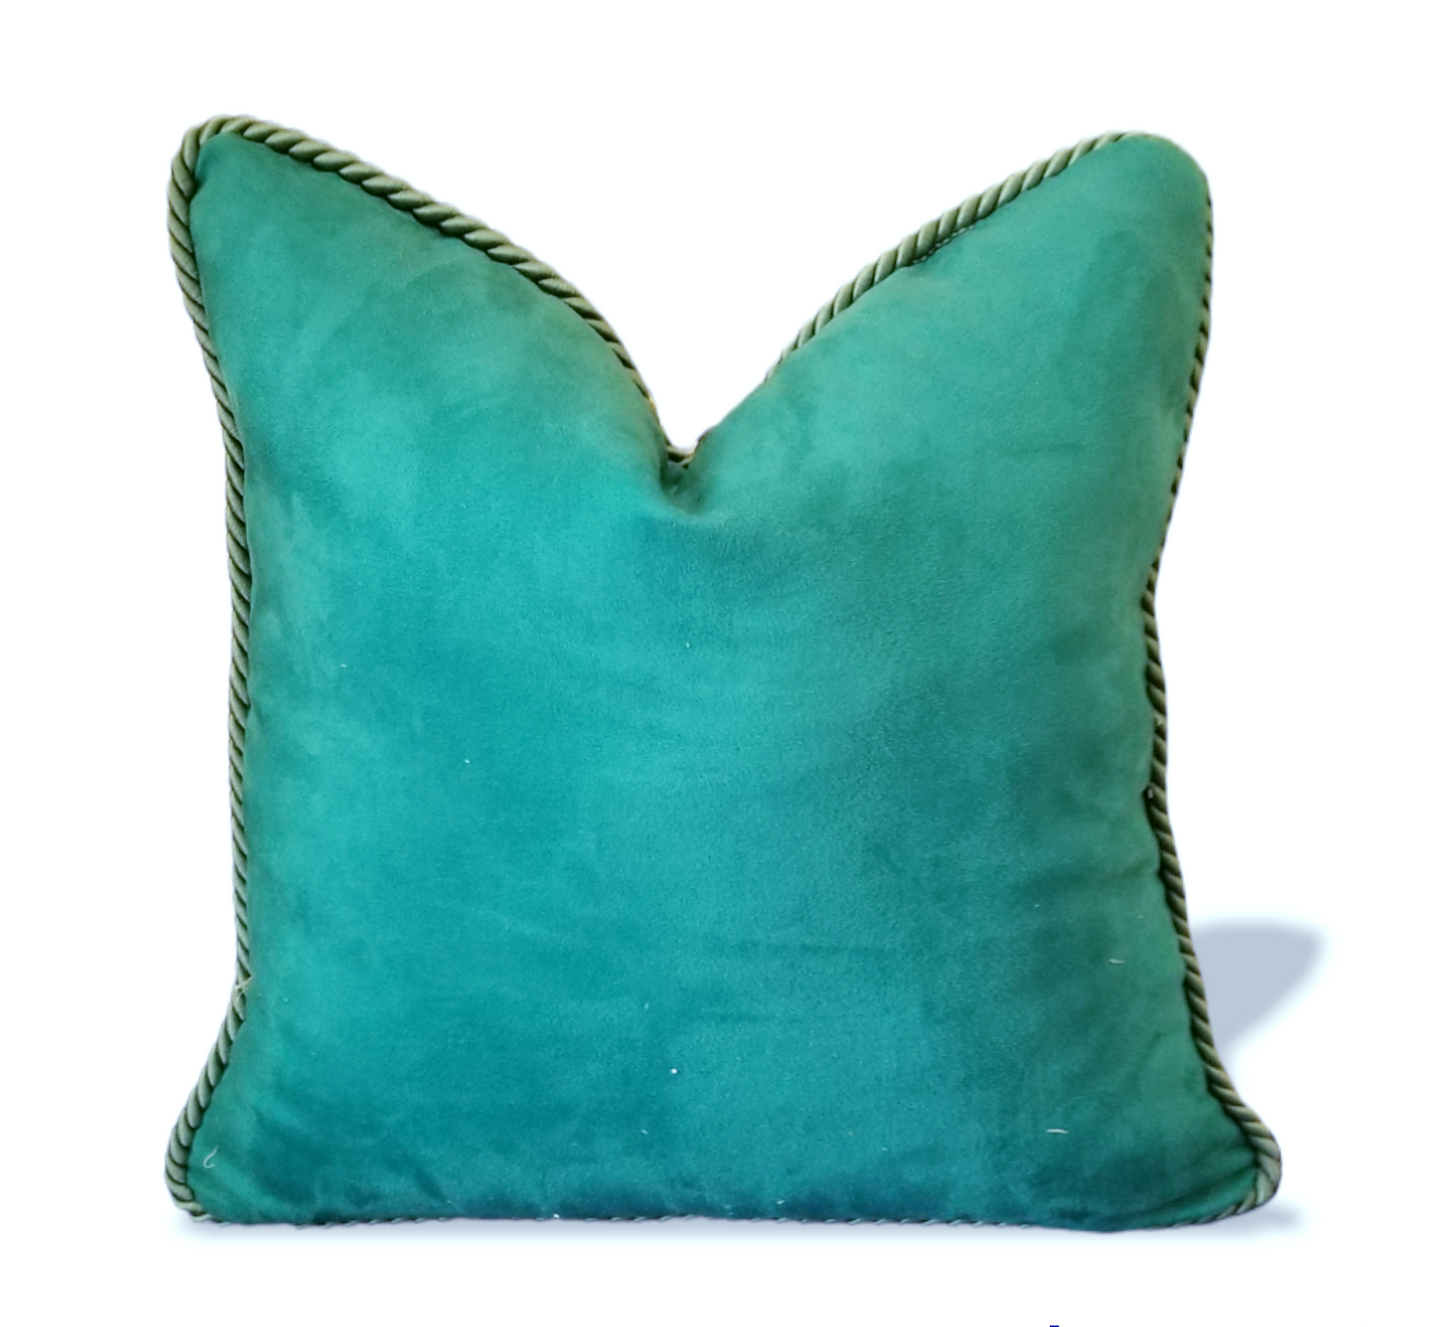 This vibrant yet relaxing designer accent pillow boasting colors such as teal, black, grey and orange.  perfect for your bedroom, livingroom or foyer.  eleganty and carefully crafted to give the highest quality finish and luxury to last for years to come.  Complete with an invisible zipper, solid teal microfiber back and piped edge.